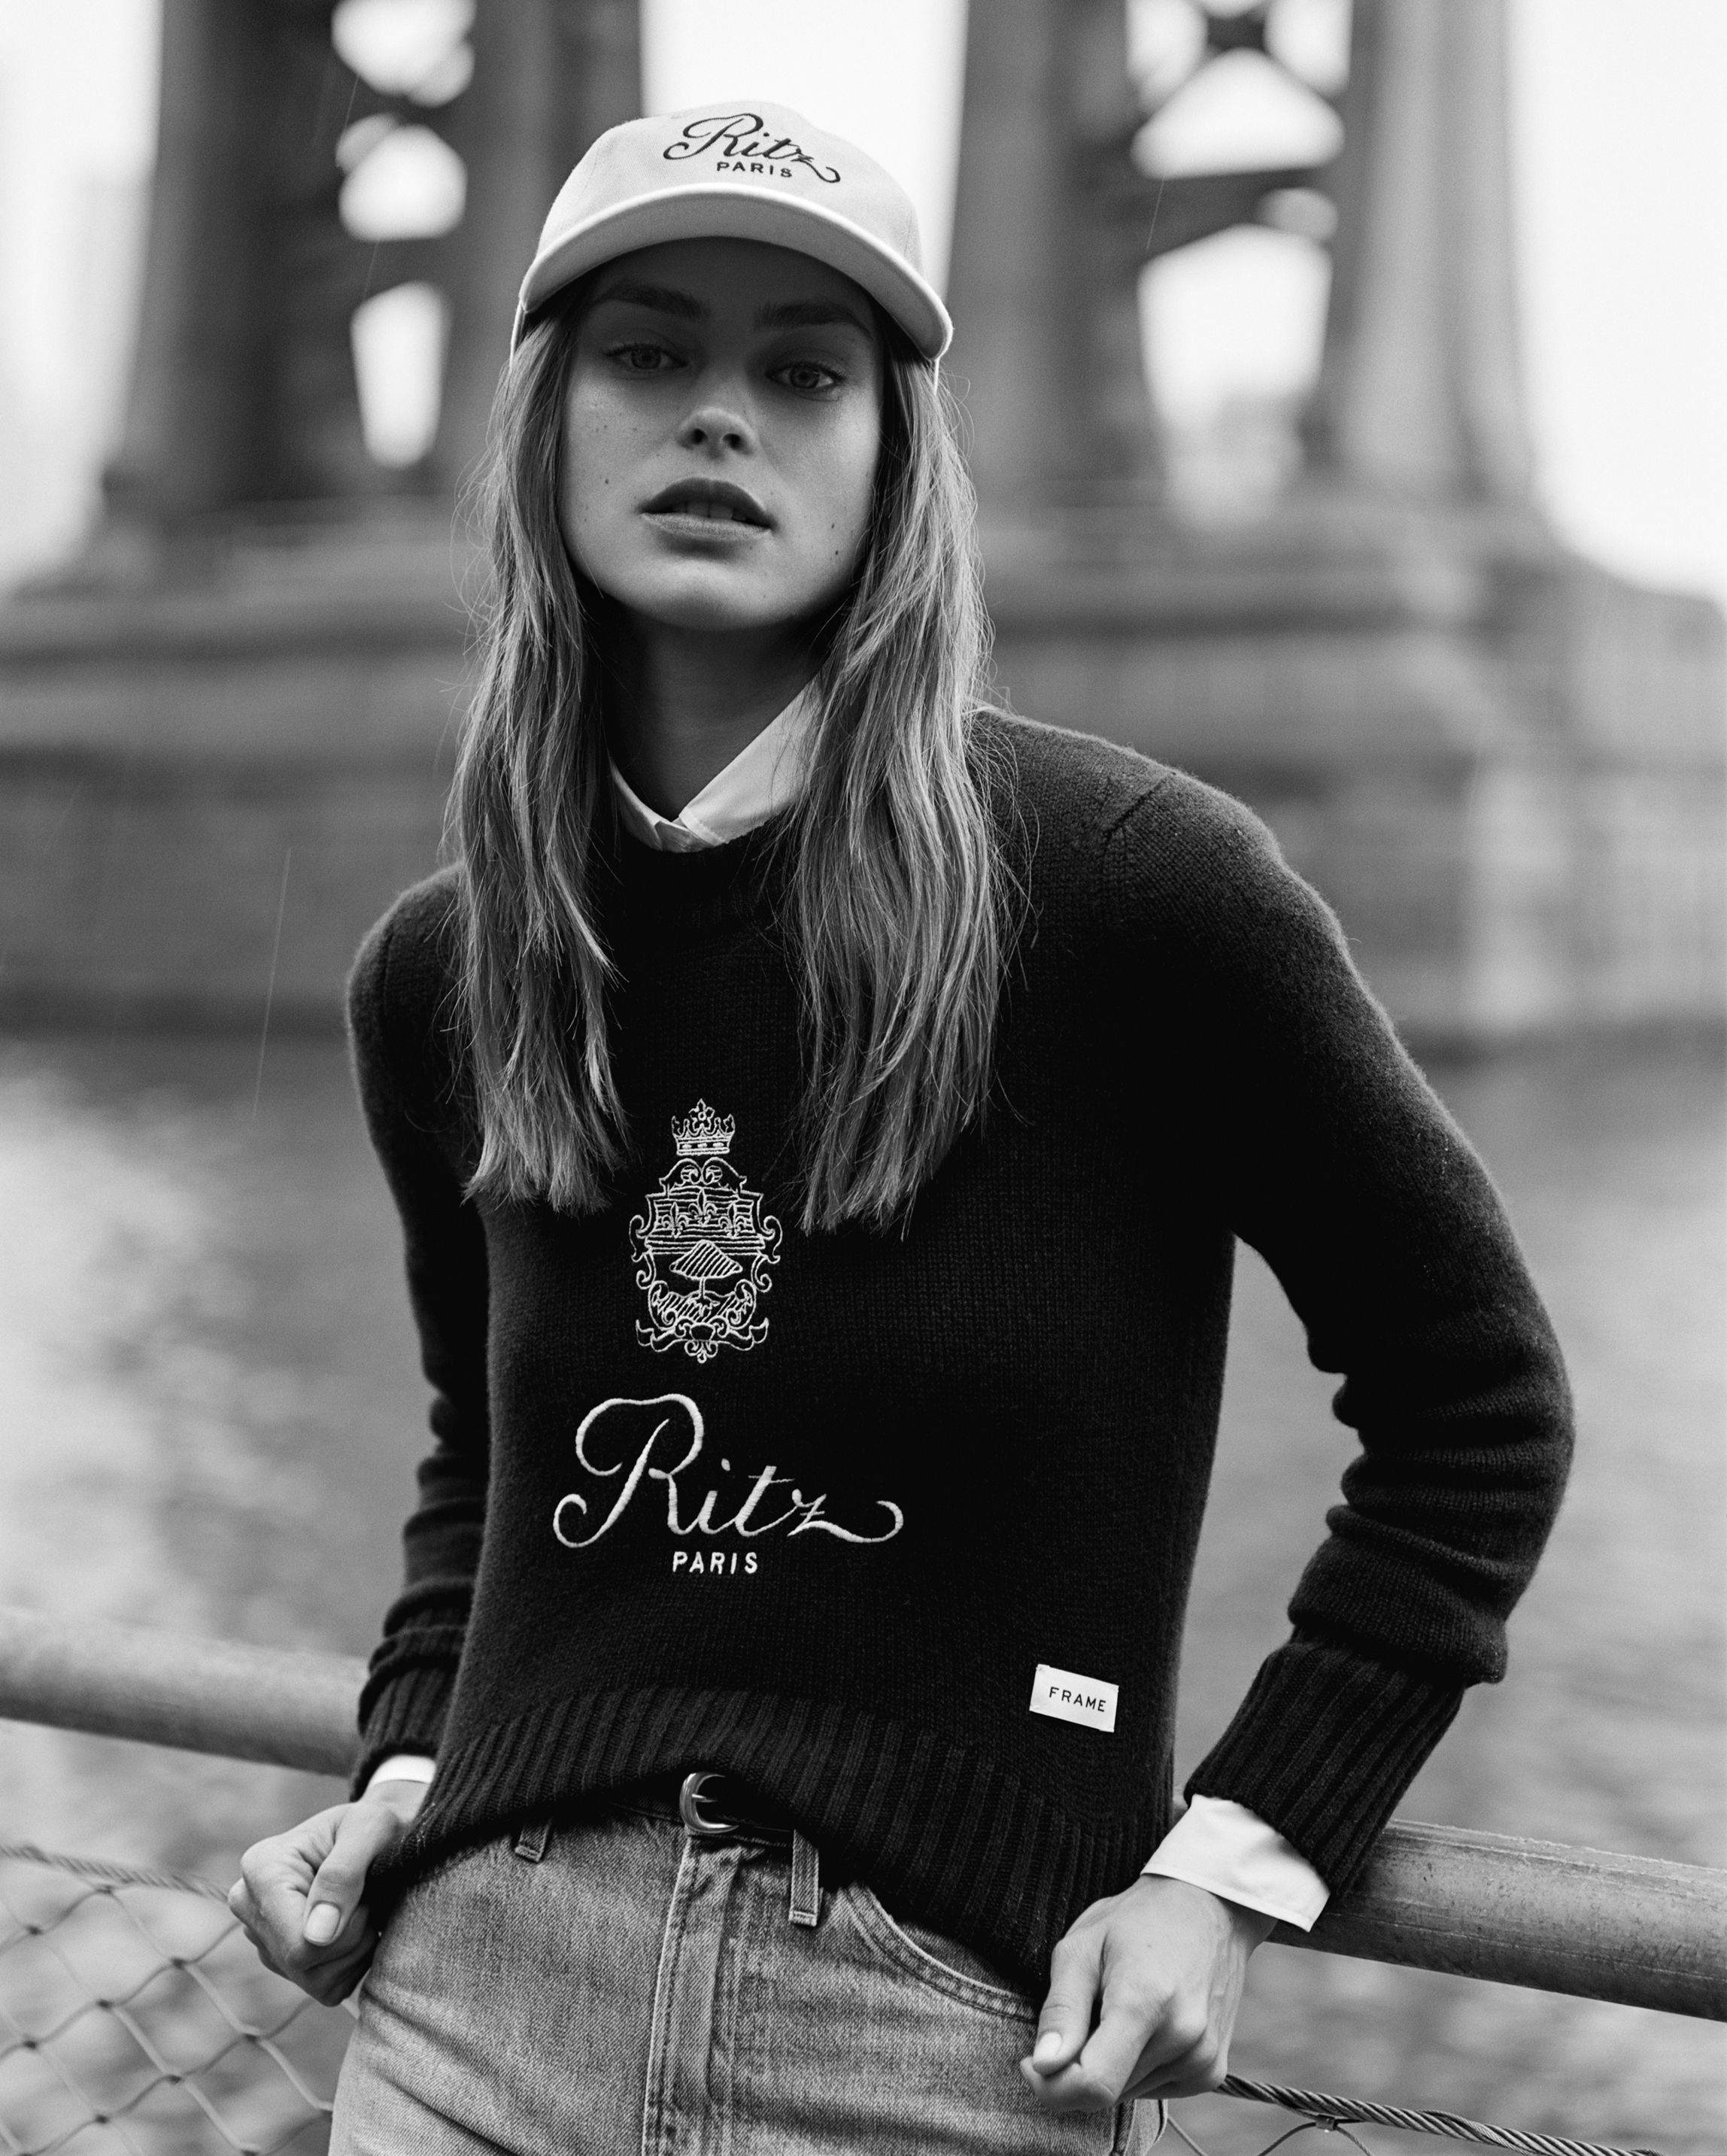 FRAME Launches Second Capsule Collection With The Ritz Paris